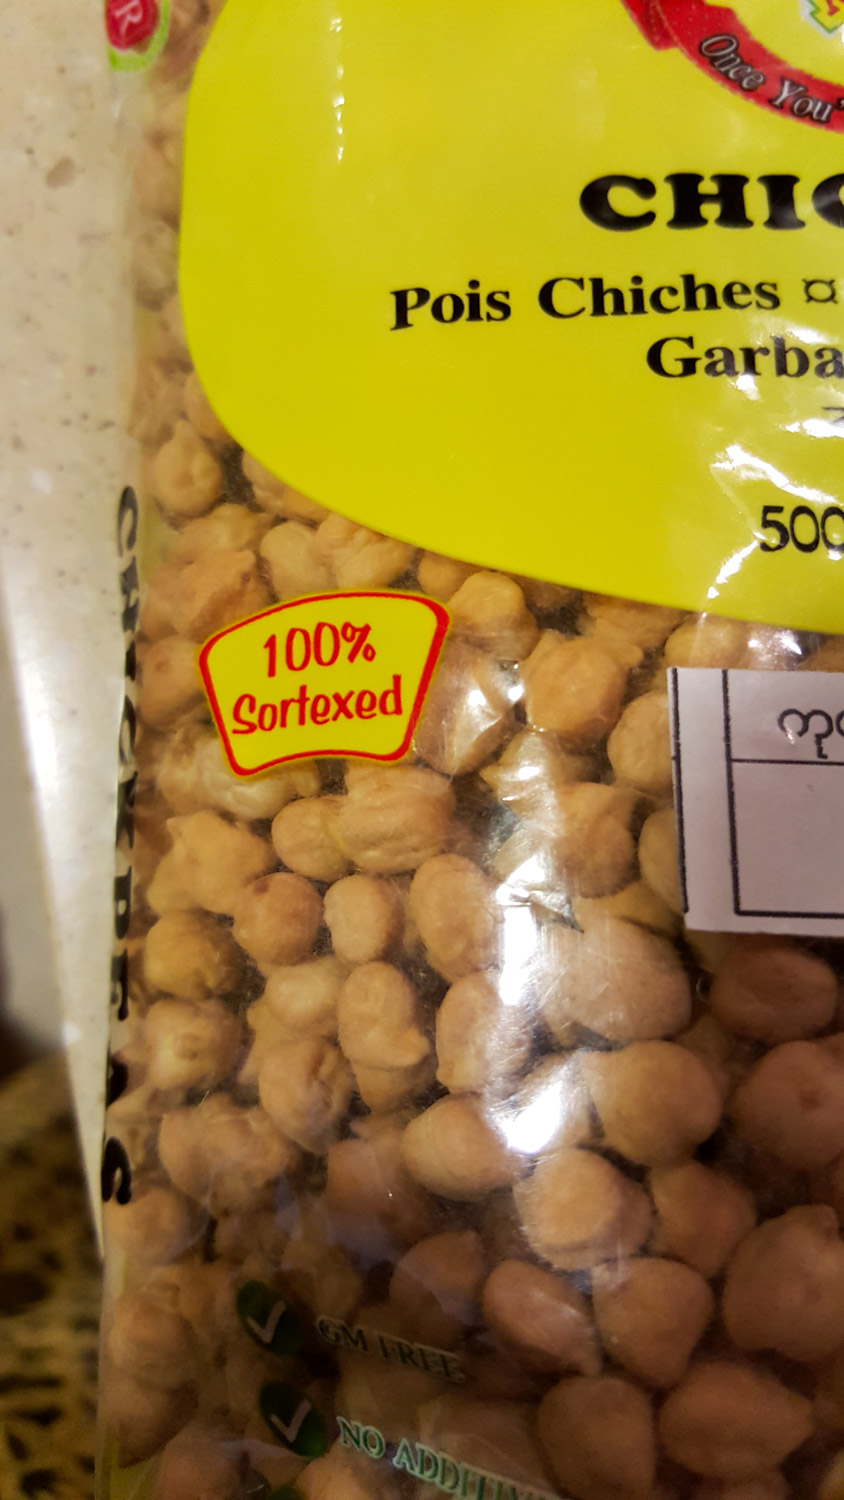 Are you sick of chickpeas that aren't 100% sortexed? Well fear no longer!